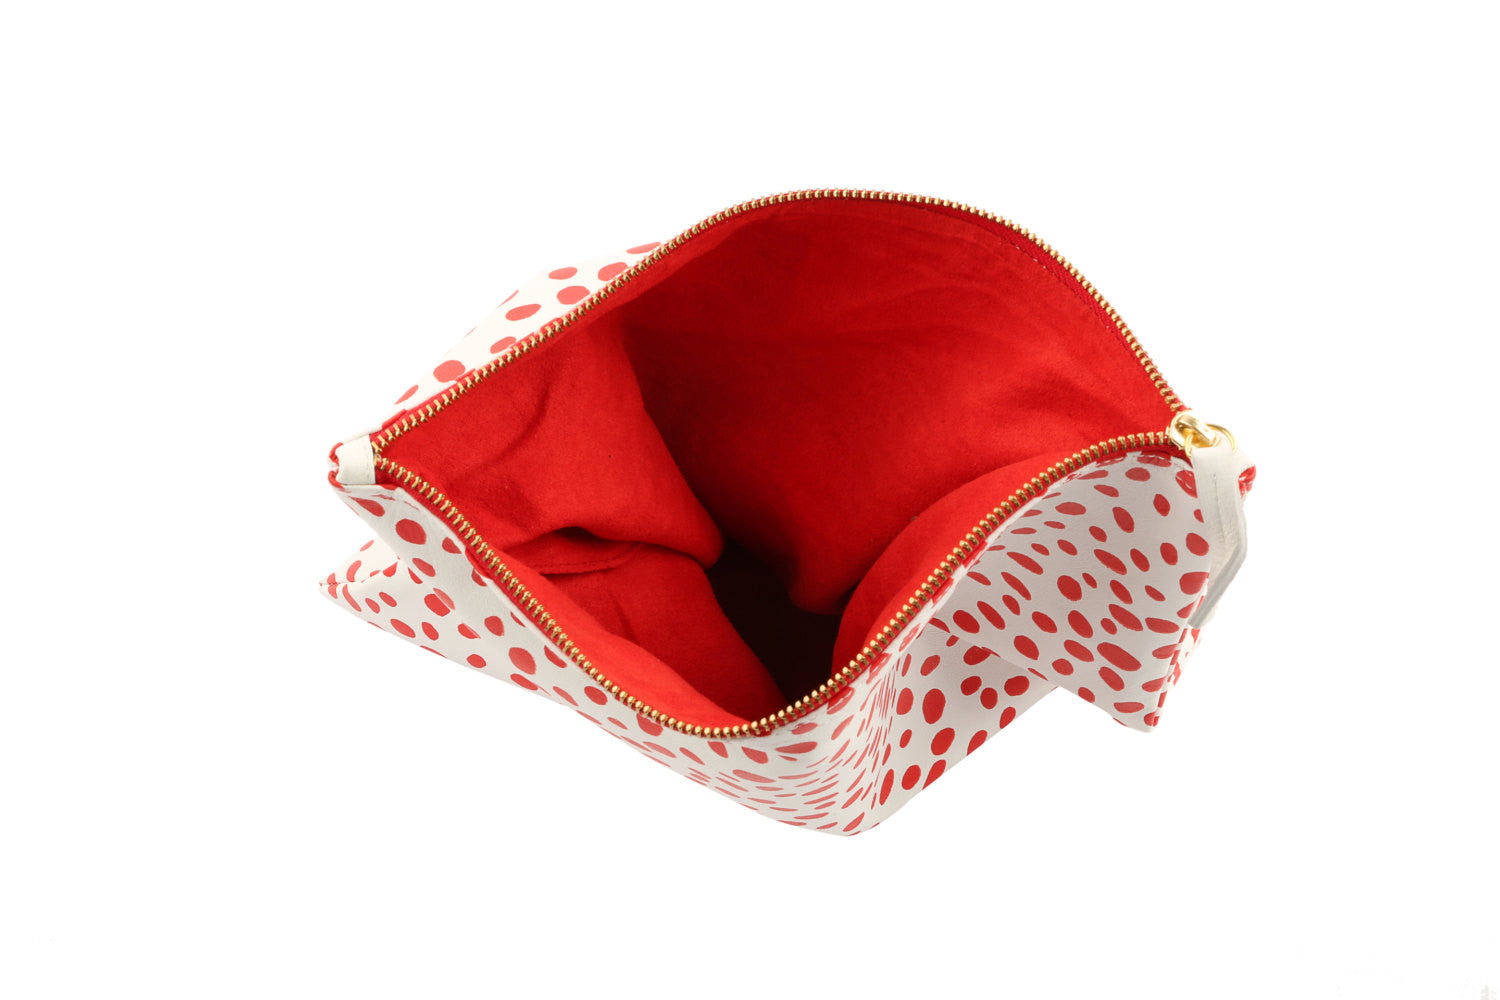 Dalmatian print leather bag fold over clutch, Dalmatian Bag, Leather Dalmatian print clutch, Dalmatian clutch, Red and White Fold over